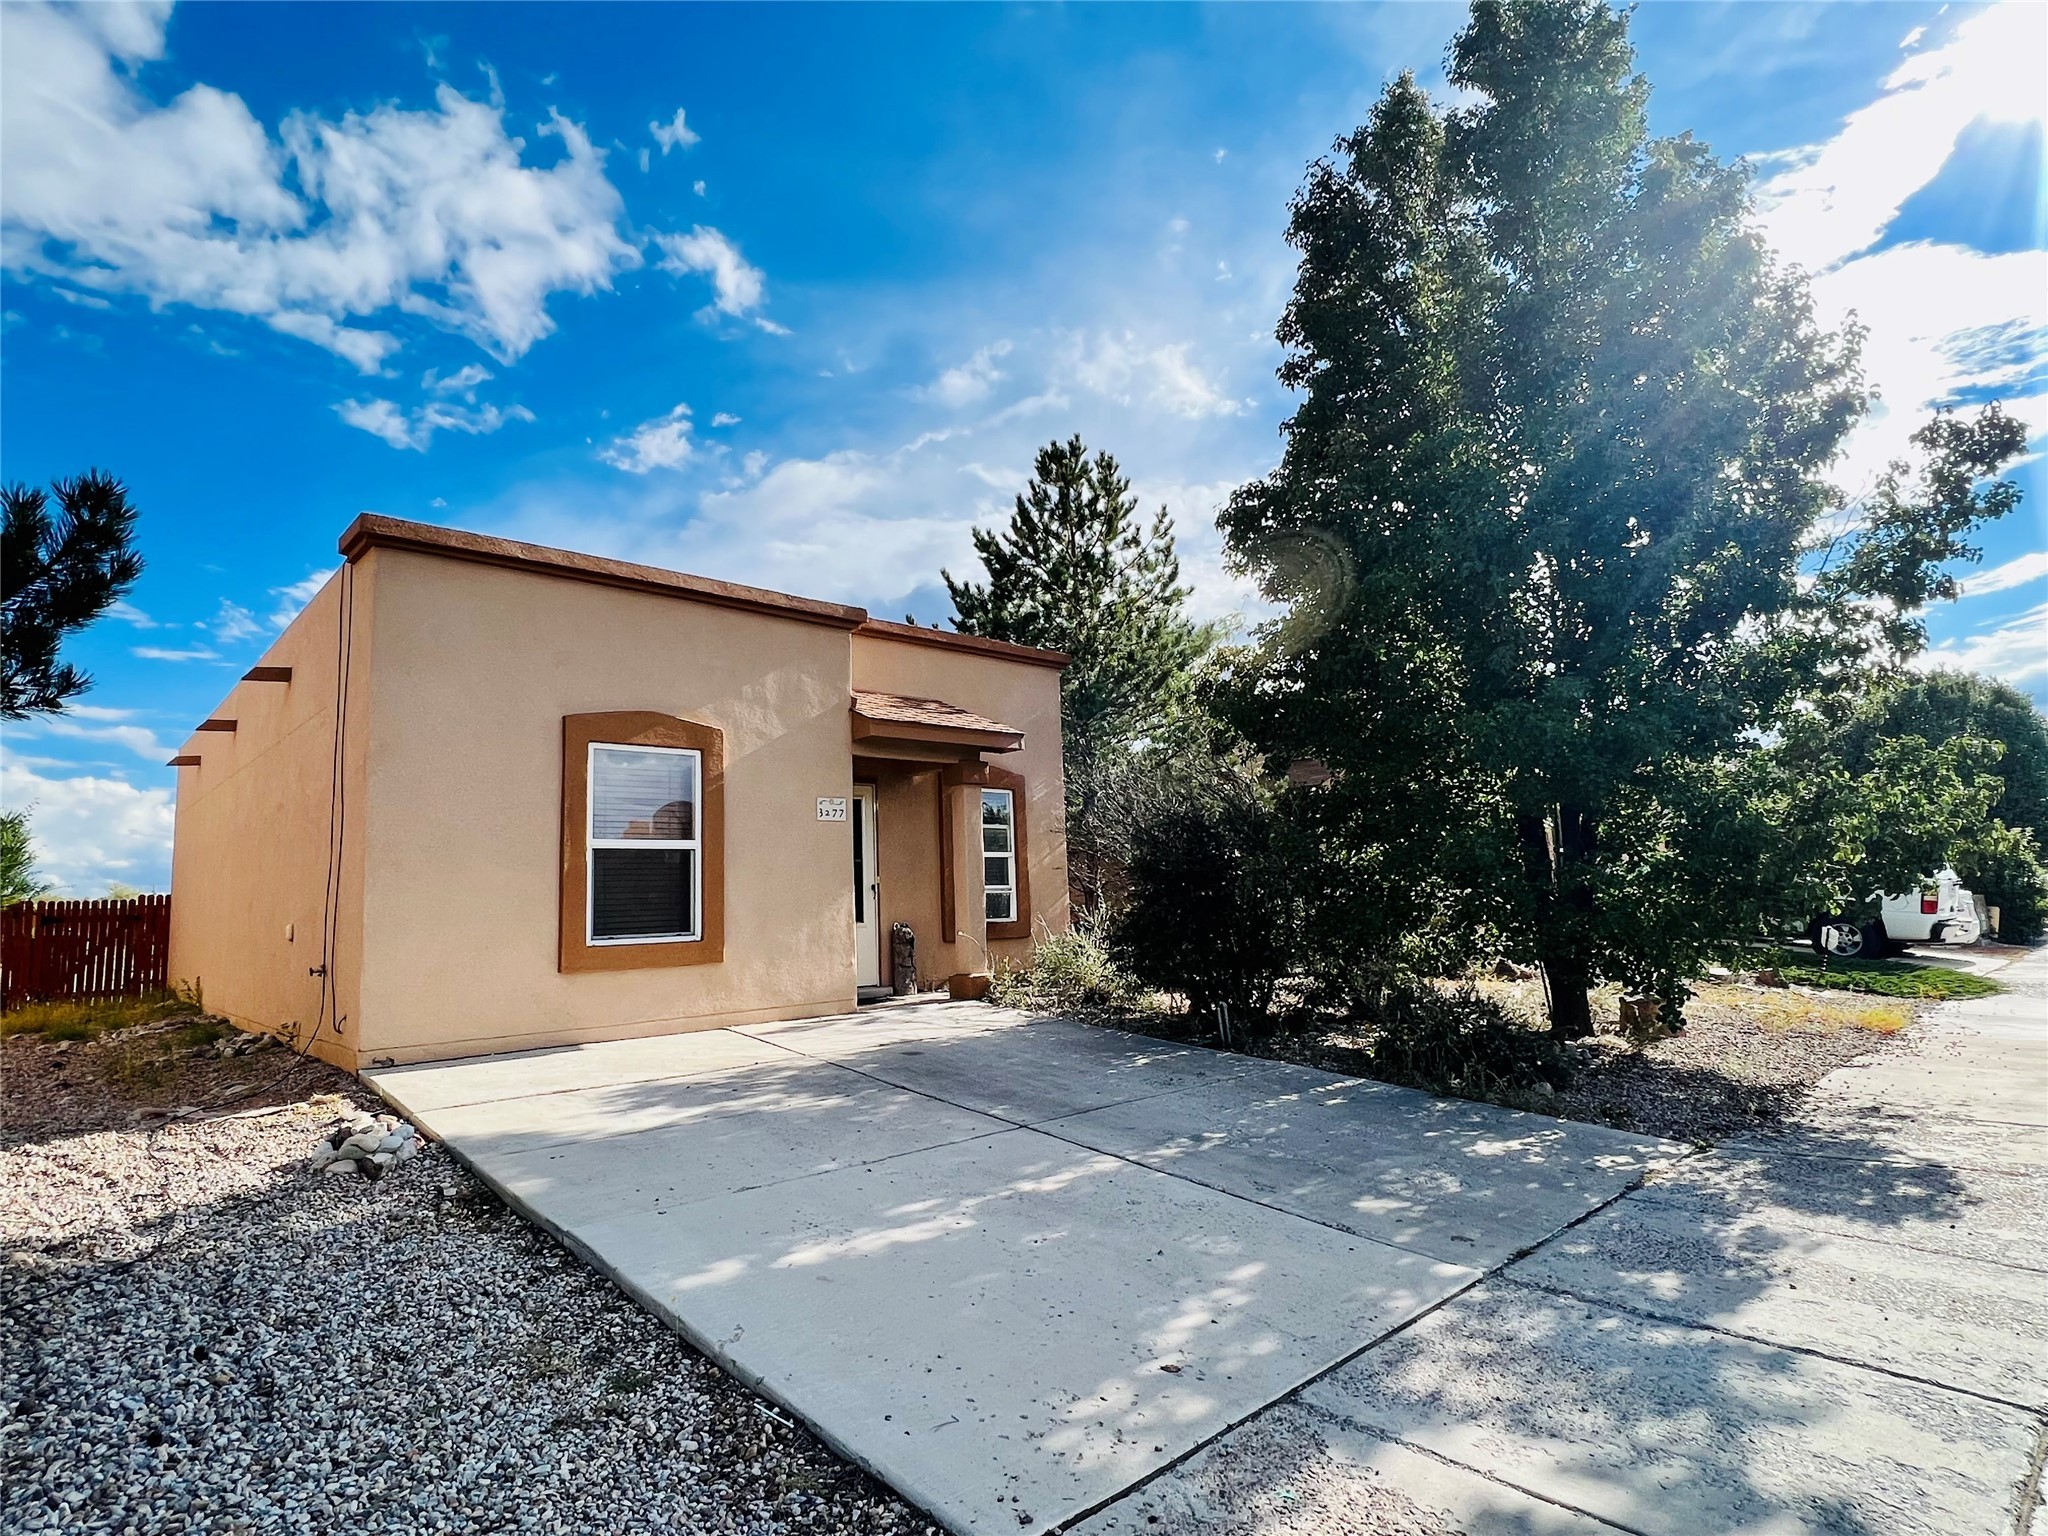 3277 Primo Colores, Santa Fe, New Mexico 87507, 2 Bedrooms Bedrooms, ,1 BathroomBathrooms,Residential,For Sale,3277 Primo Colores,202233104